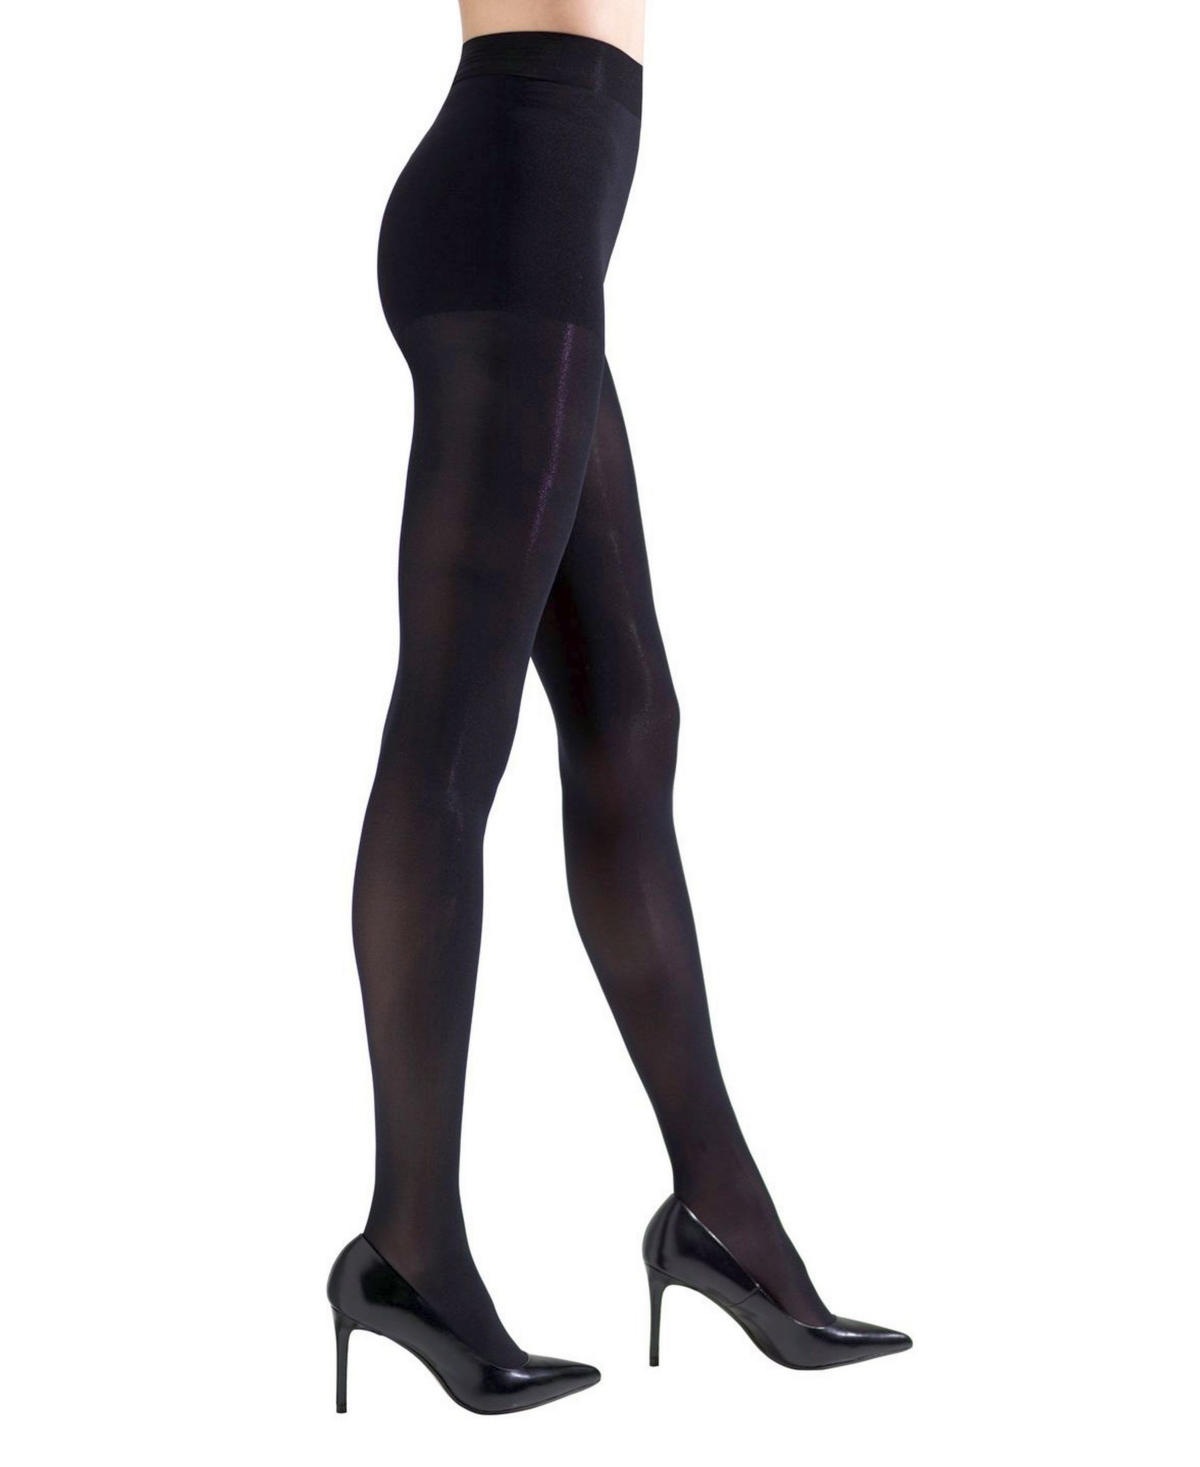 Women's Perfectly Opaque Control Top Tights - Black